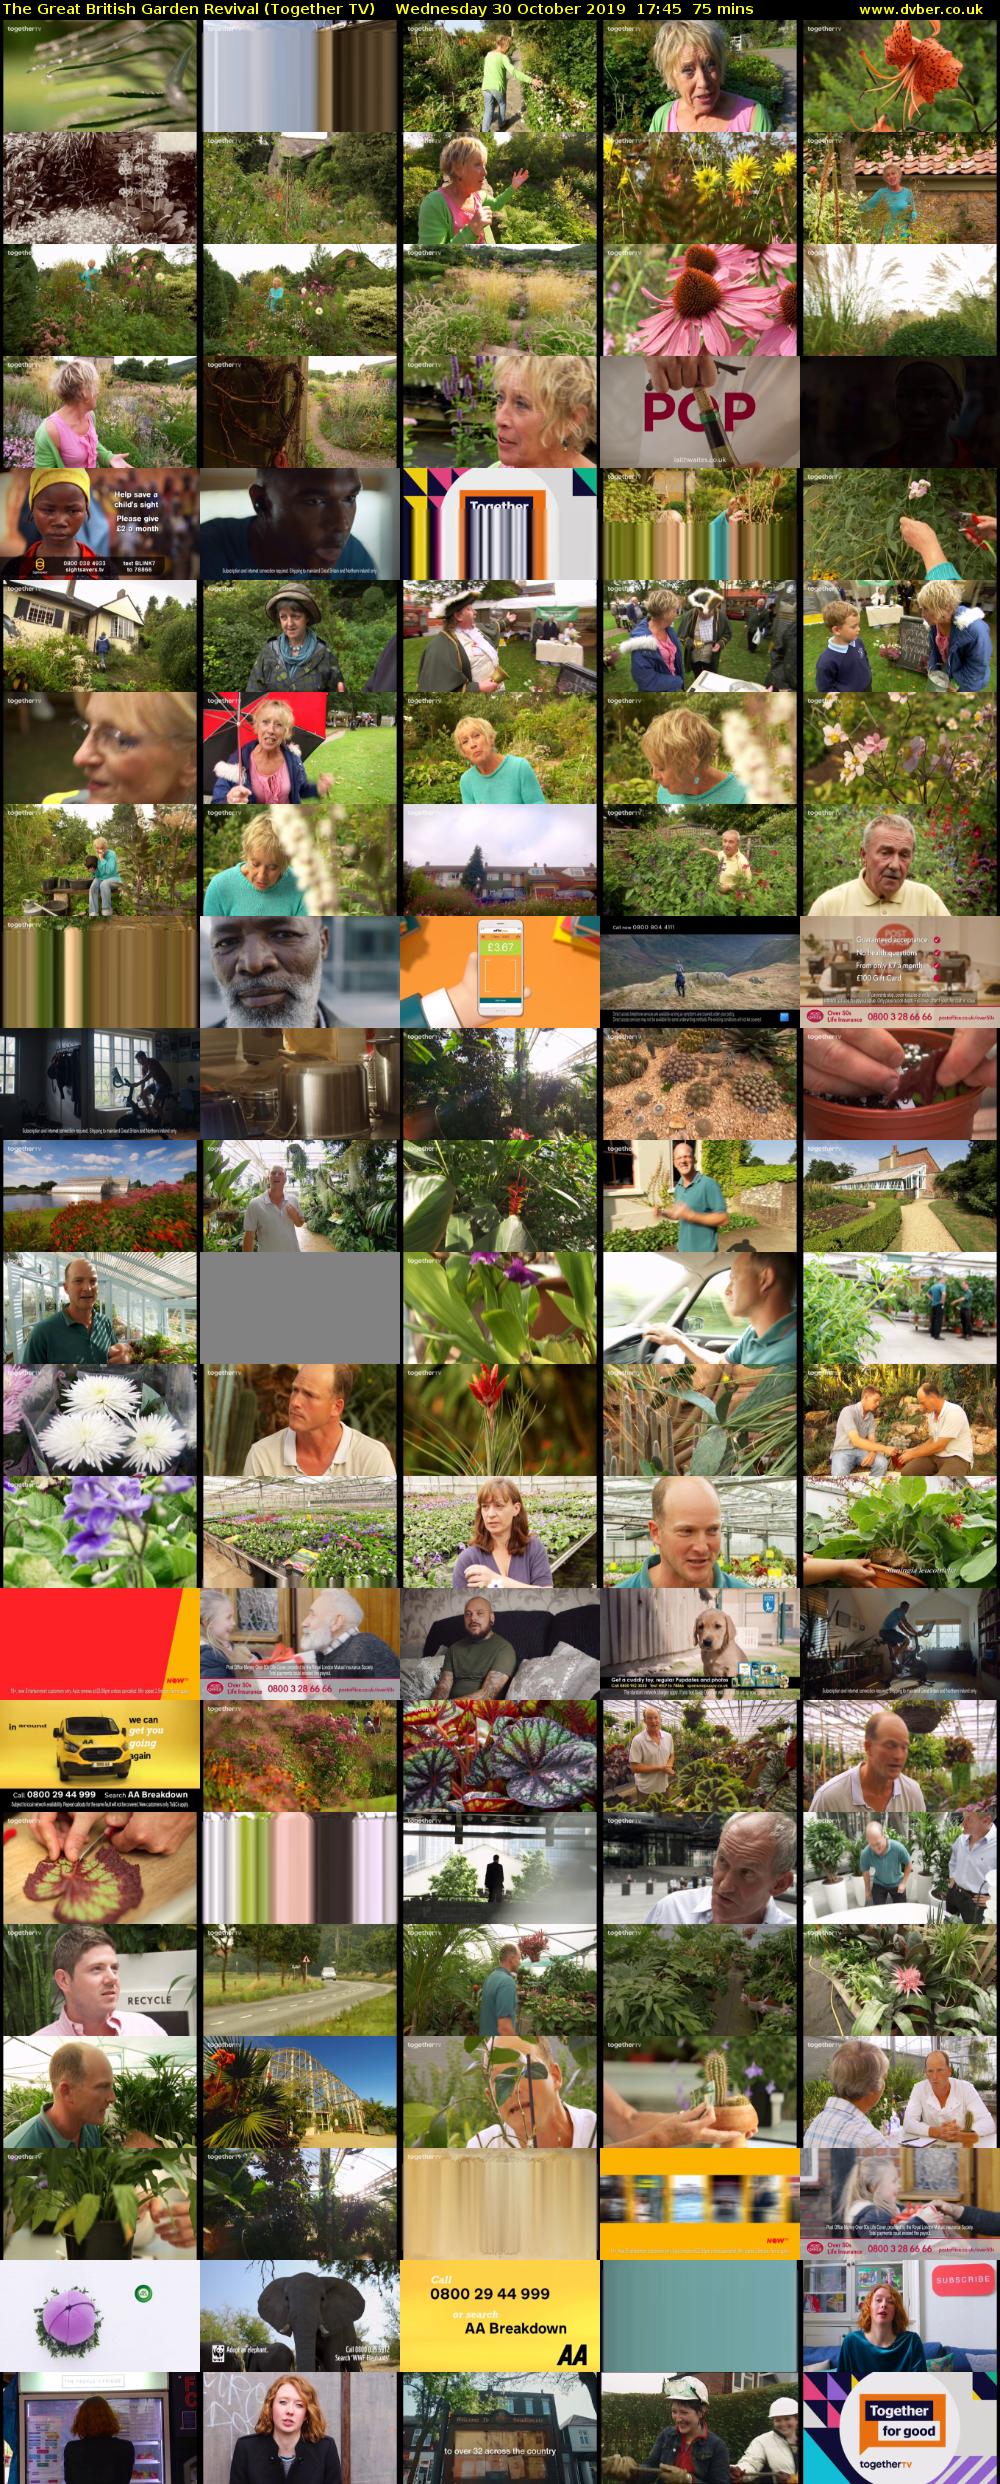 The Great British Garden Revival (Together TV) Wednesday 30 October 2019 17:45 - 19:00